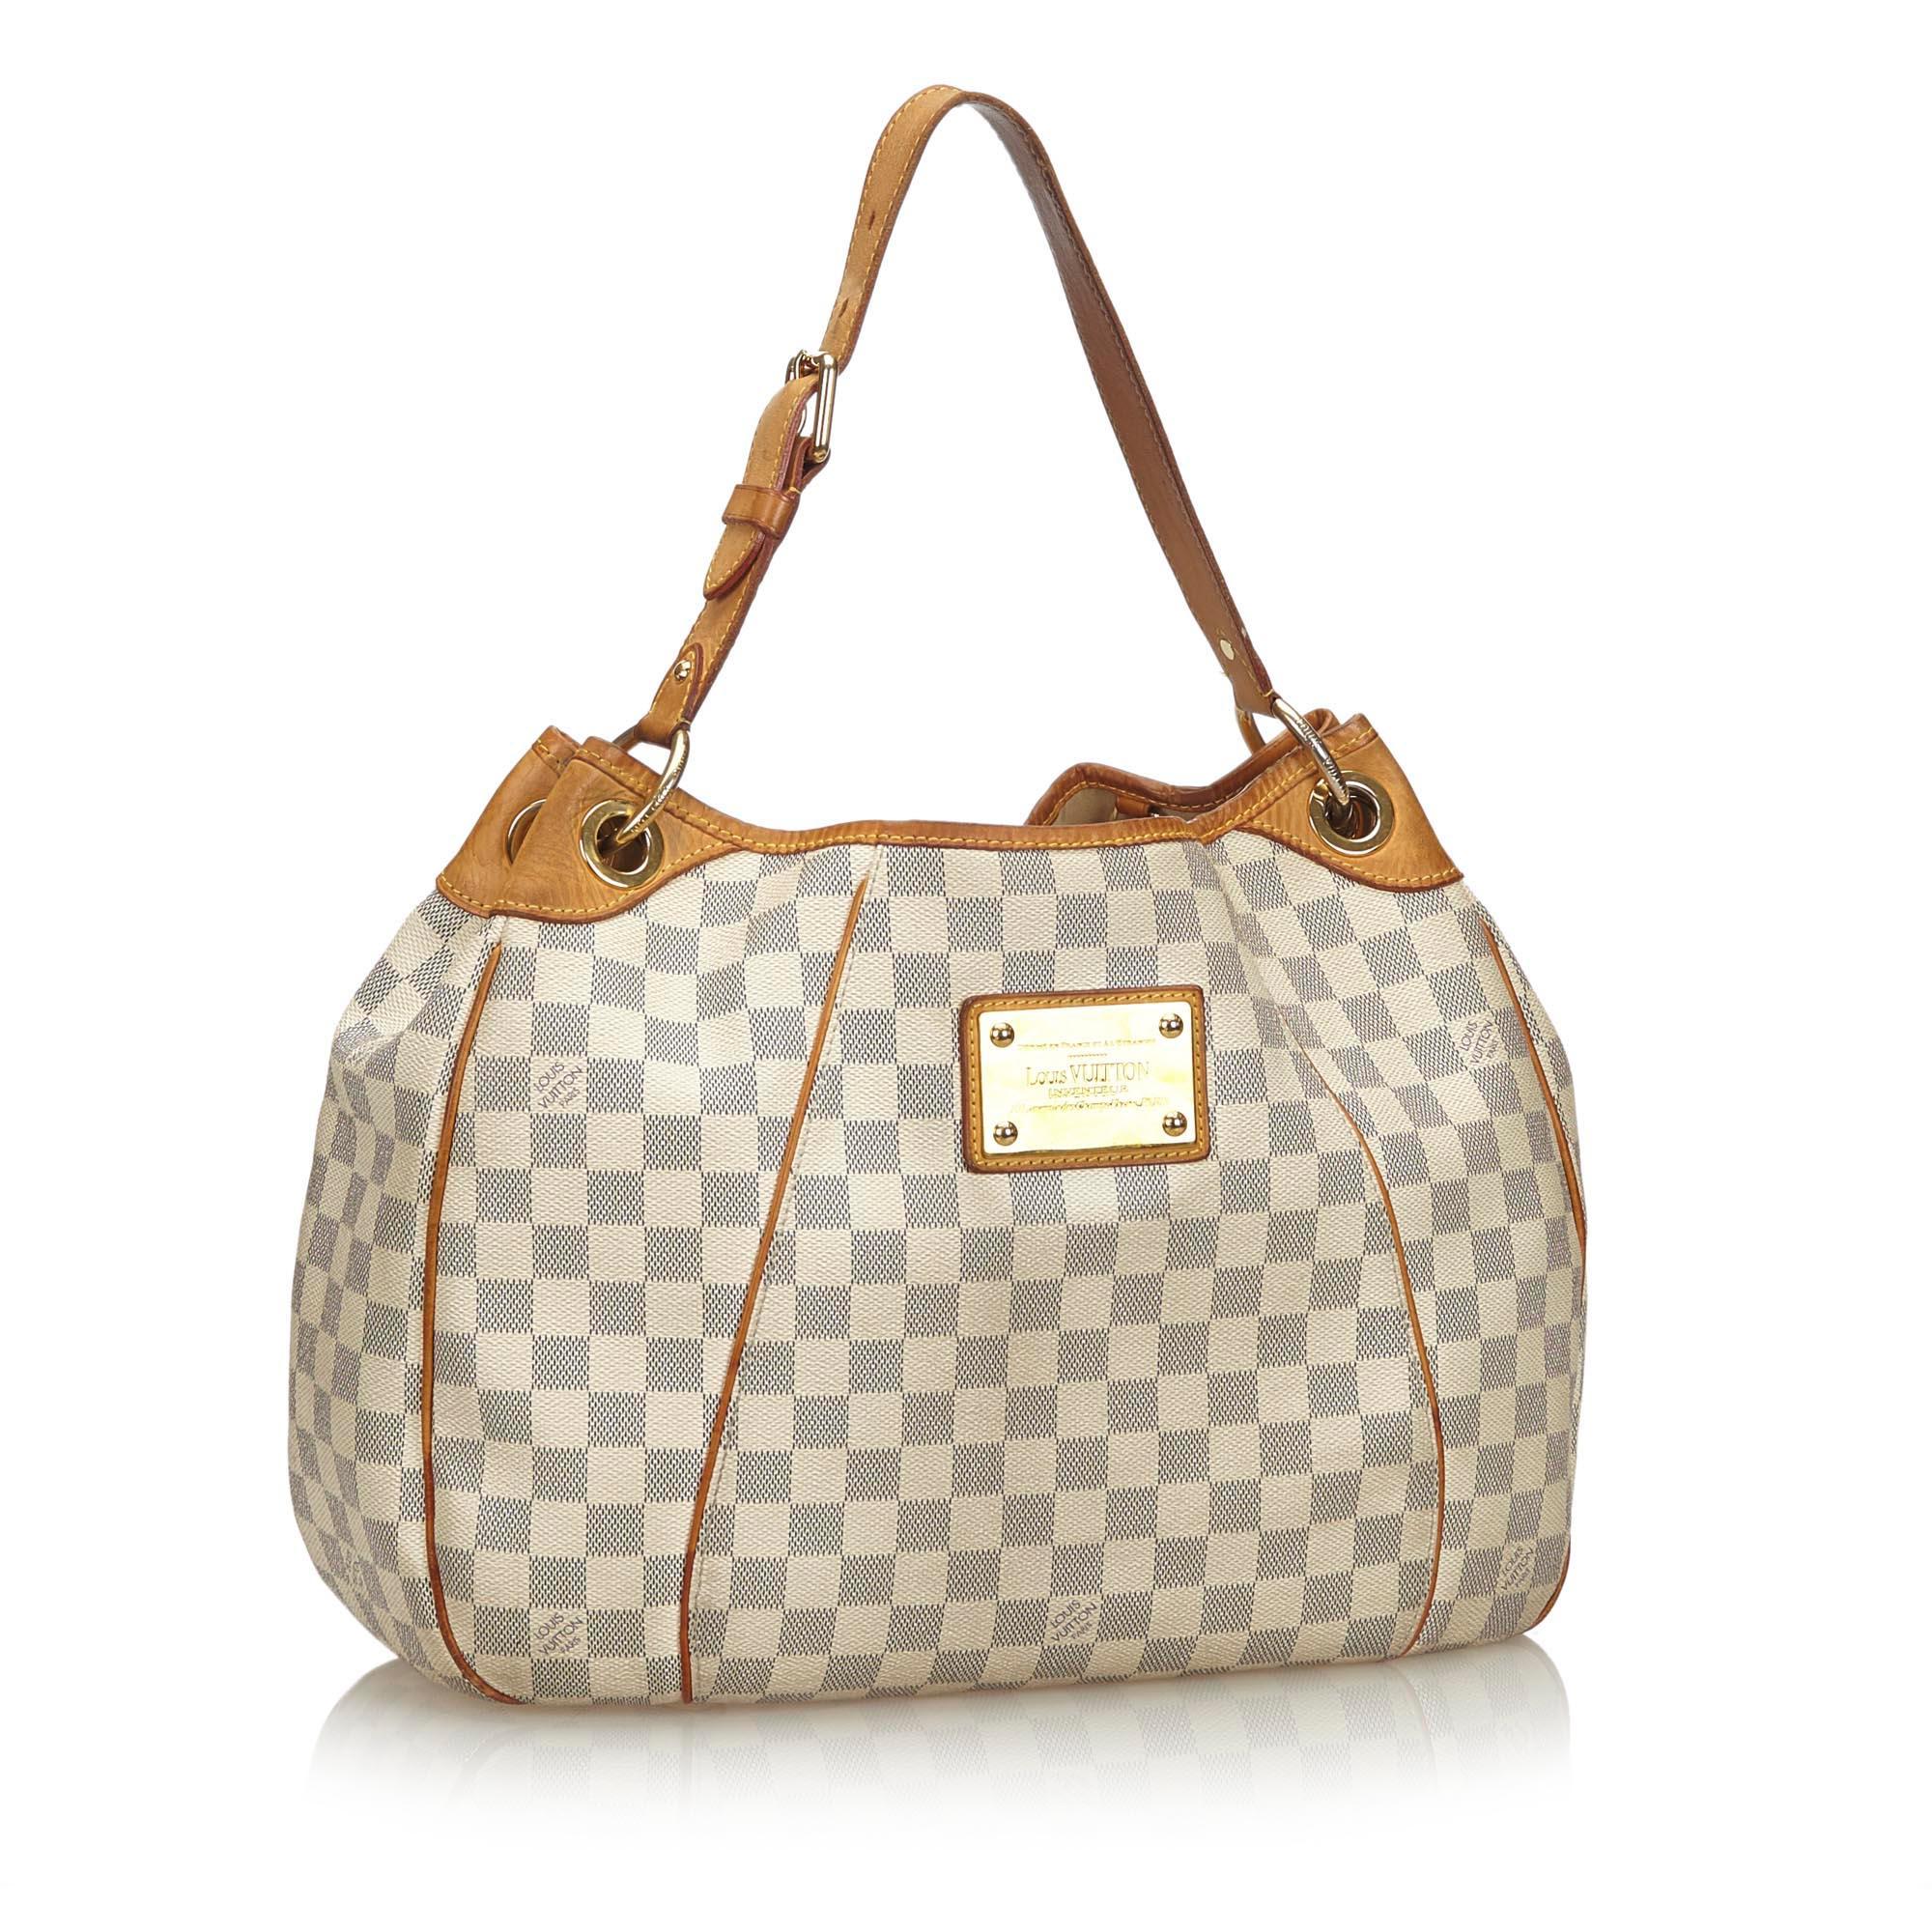 The Galliera PM features a damier azur canvas body with Vachetta leather trim, flat vachetta strap, an open top with a magnetic closure, and an interior flap pocket. It carries as B+ condition rating.

Inclusions: 
This item does not come with